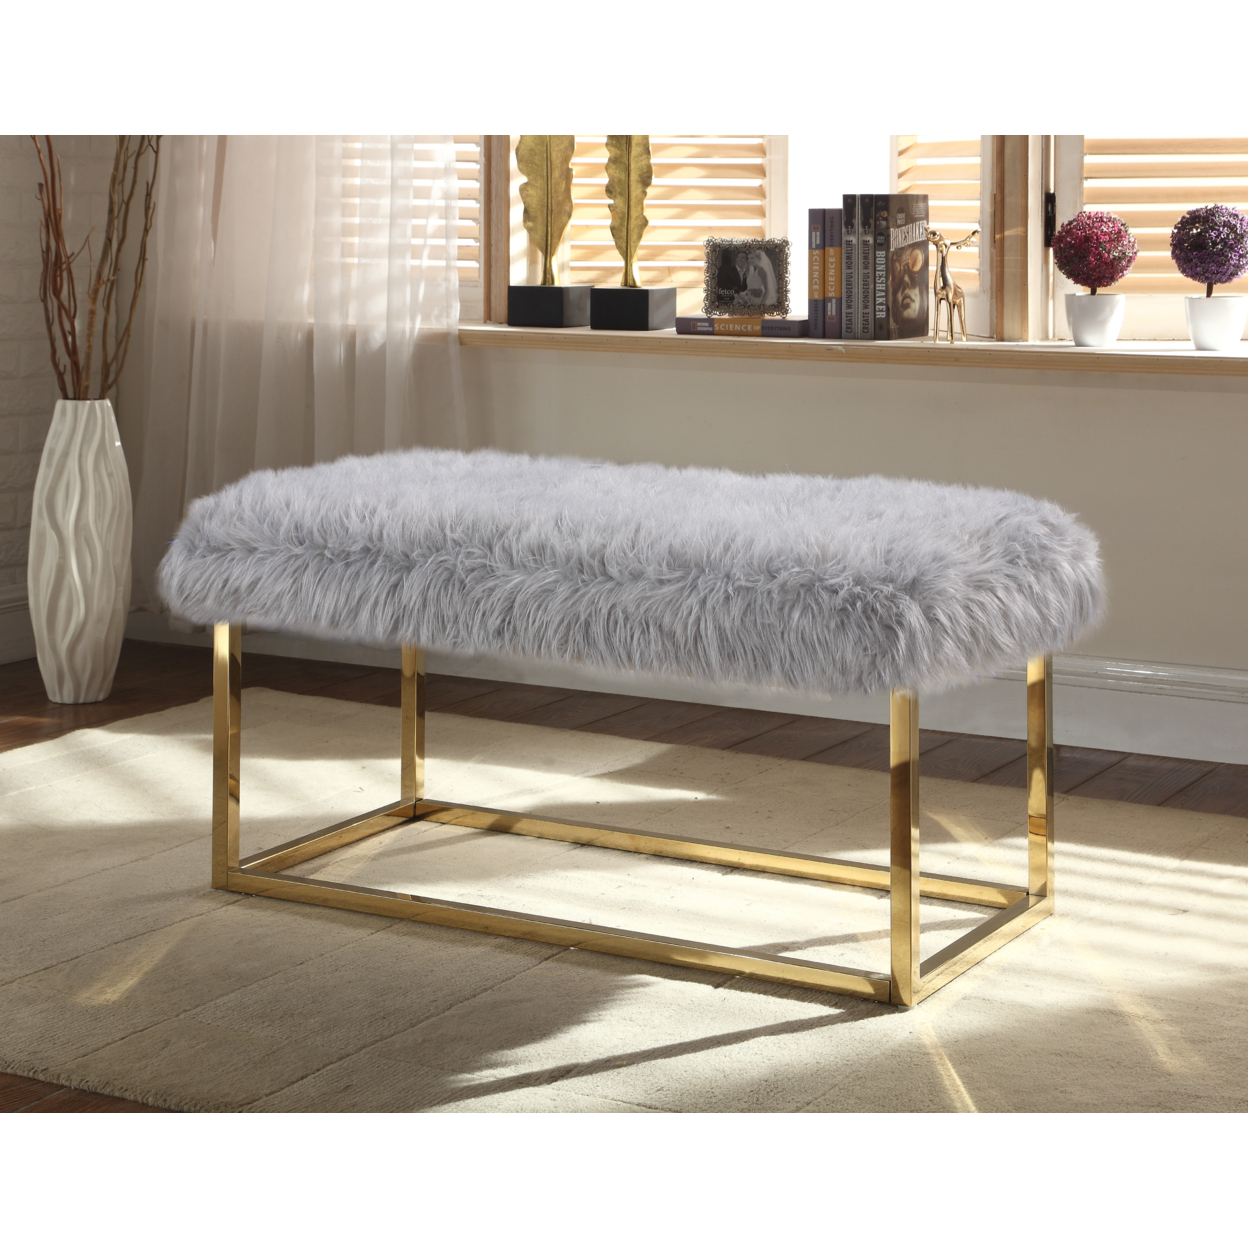 Audrey Bench Ottoman Faux Fur Brass Finished Stainless Steel Metal Frame - Beige